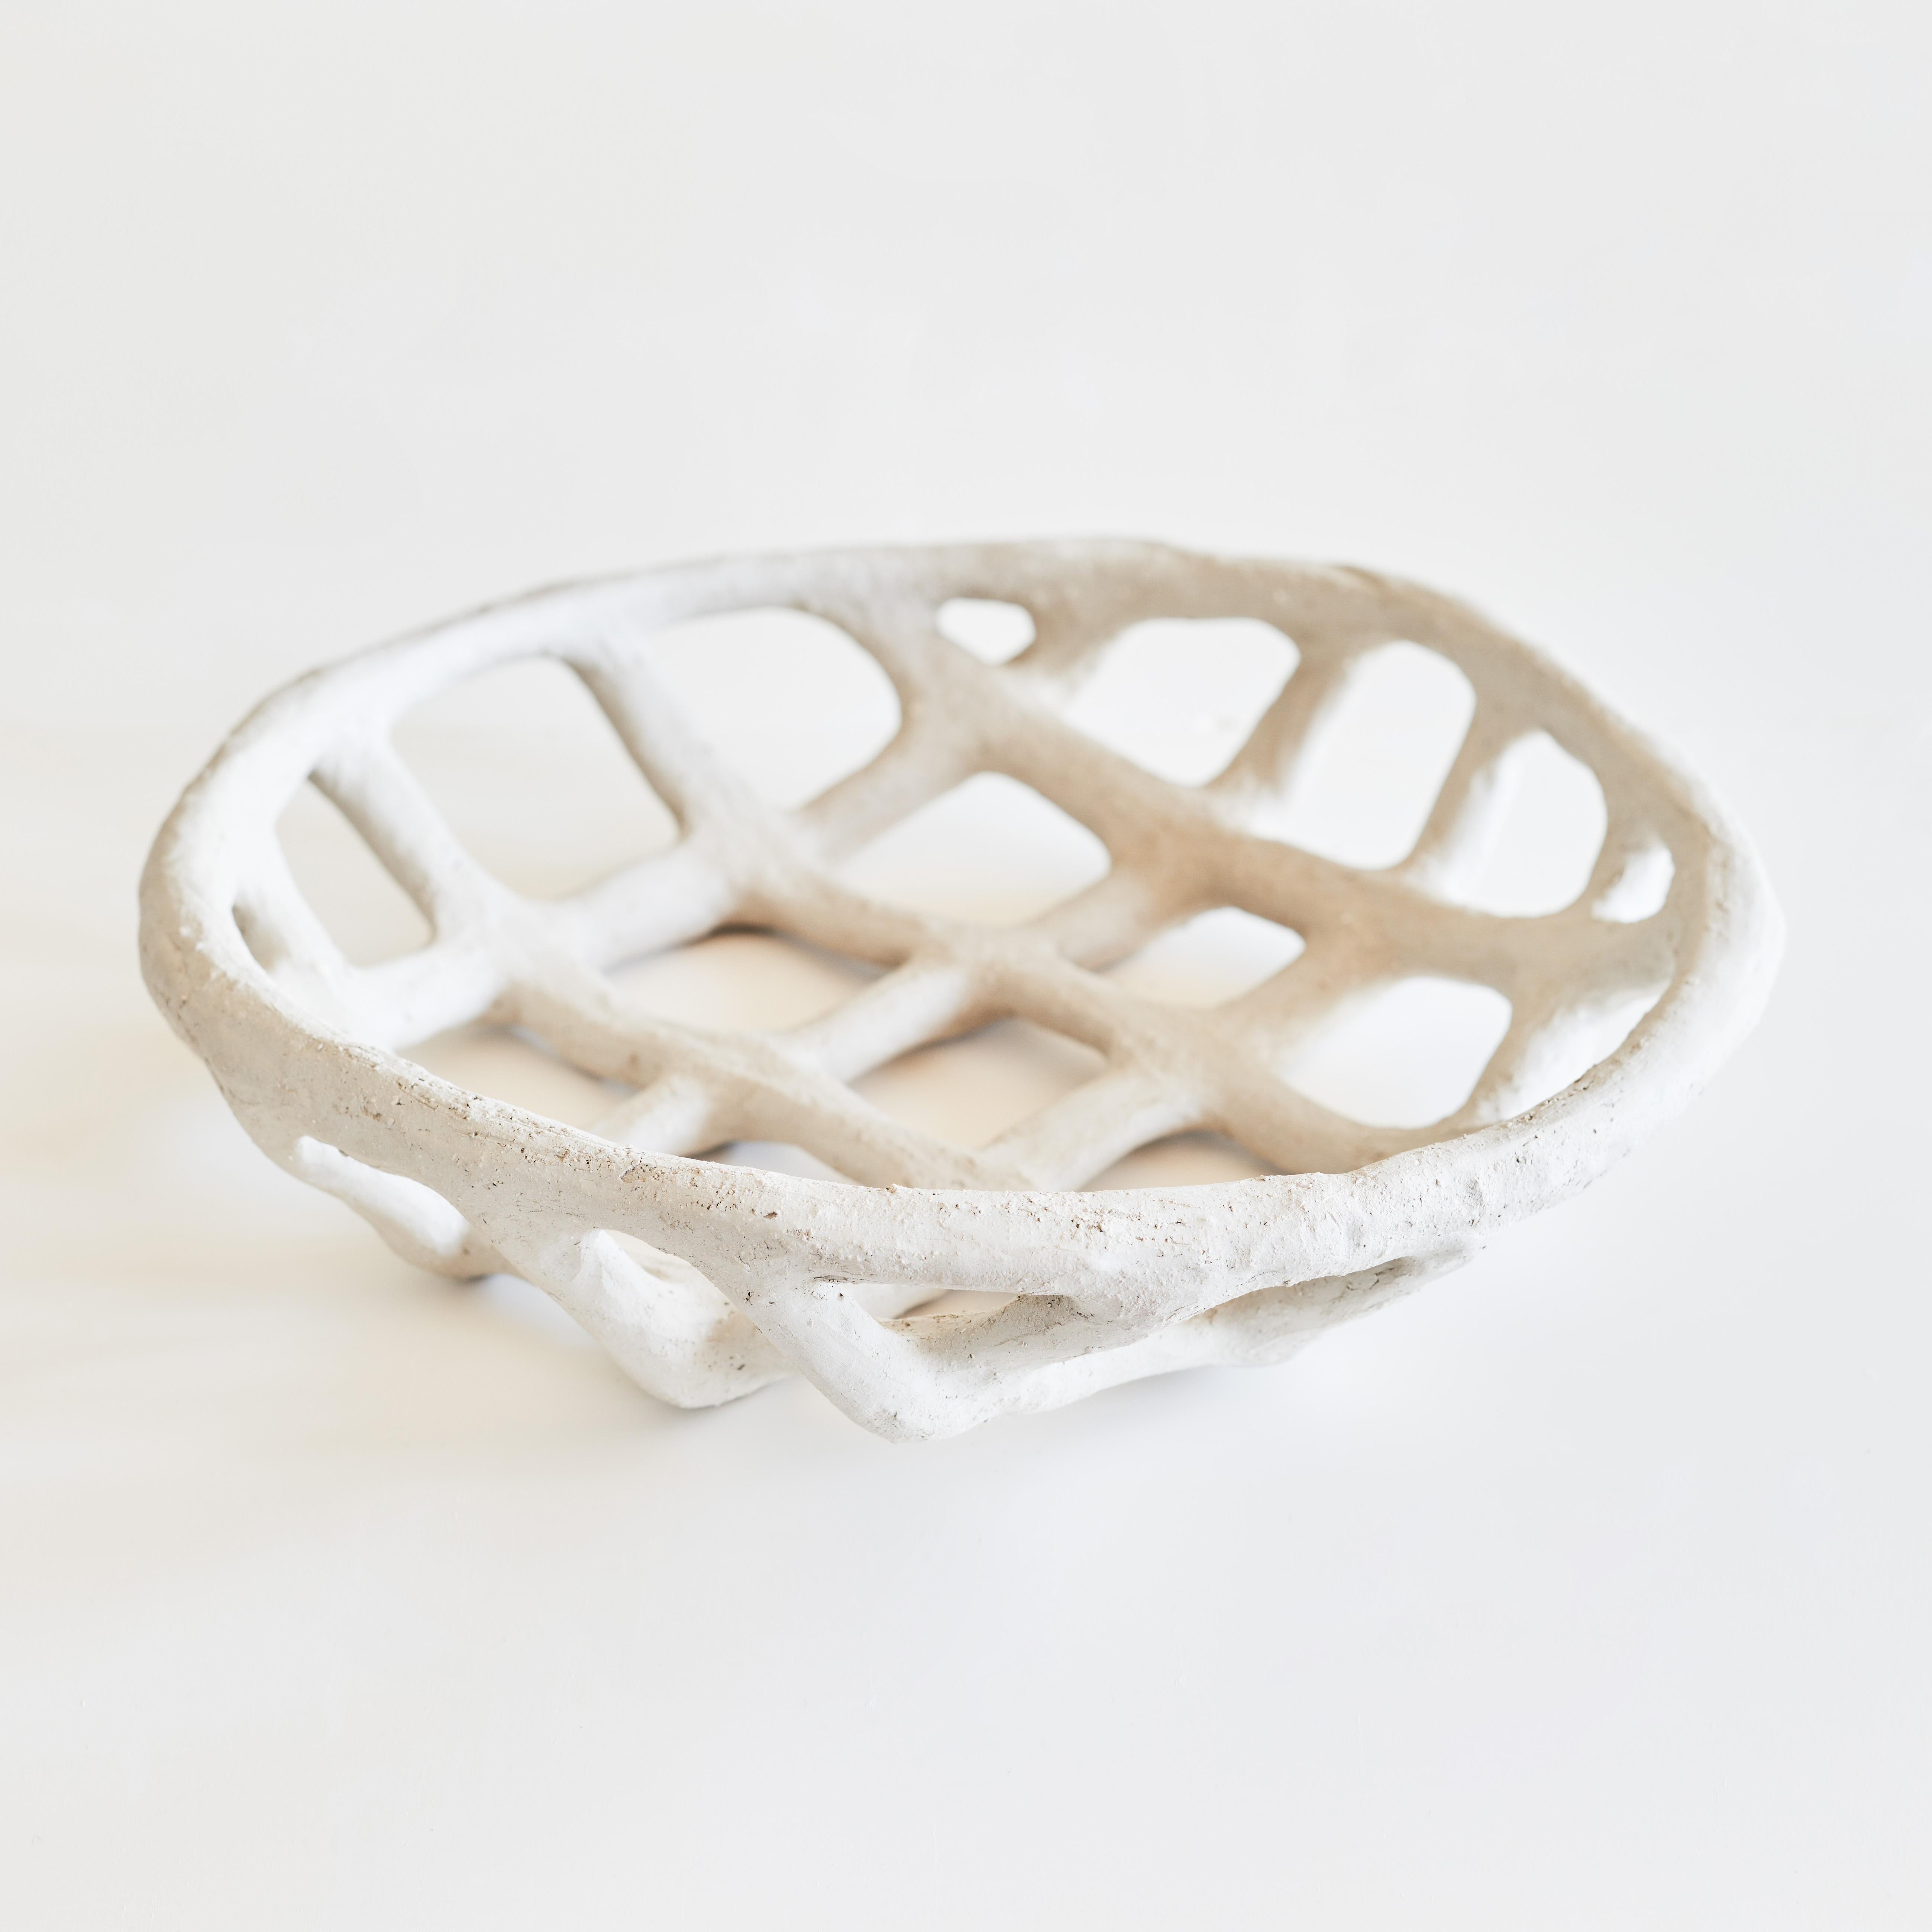 La Corbeille IV by Claire Pain 
Dimensions: D 40 x H 8 cm
Materials: Stoneware

Fragility and delicacy arise from a raw material, in which strength and vigour intertwine to give shape to the singular work of Claire Pain.
Modeled through the